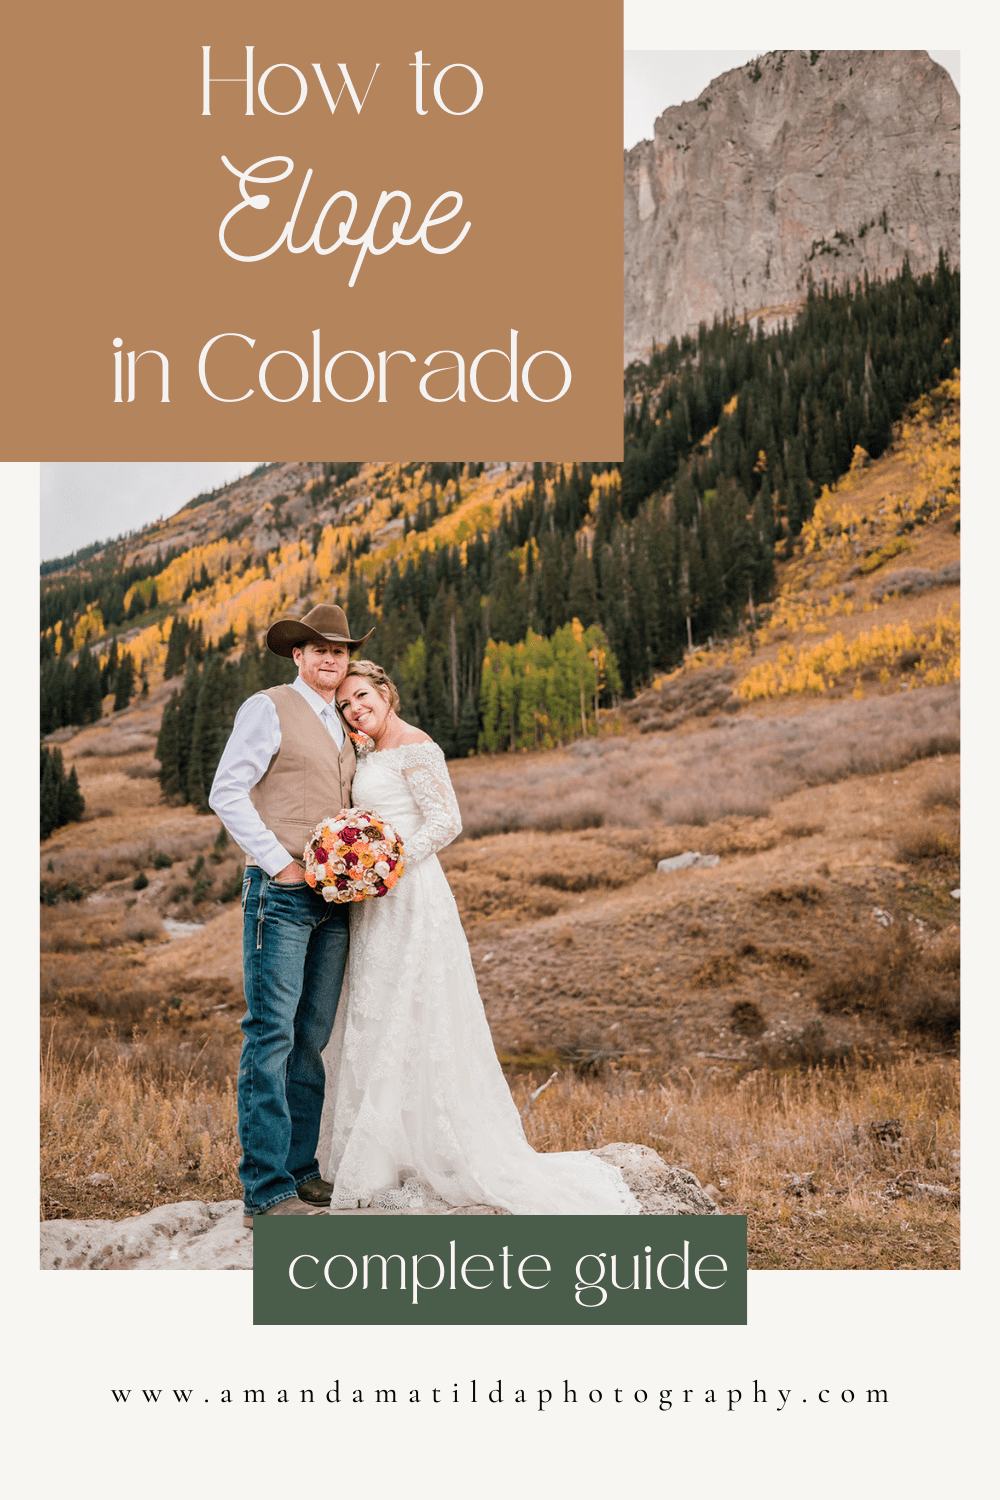 How to elope in Colorado:  A Complete Guide